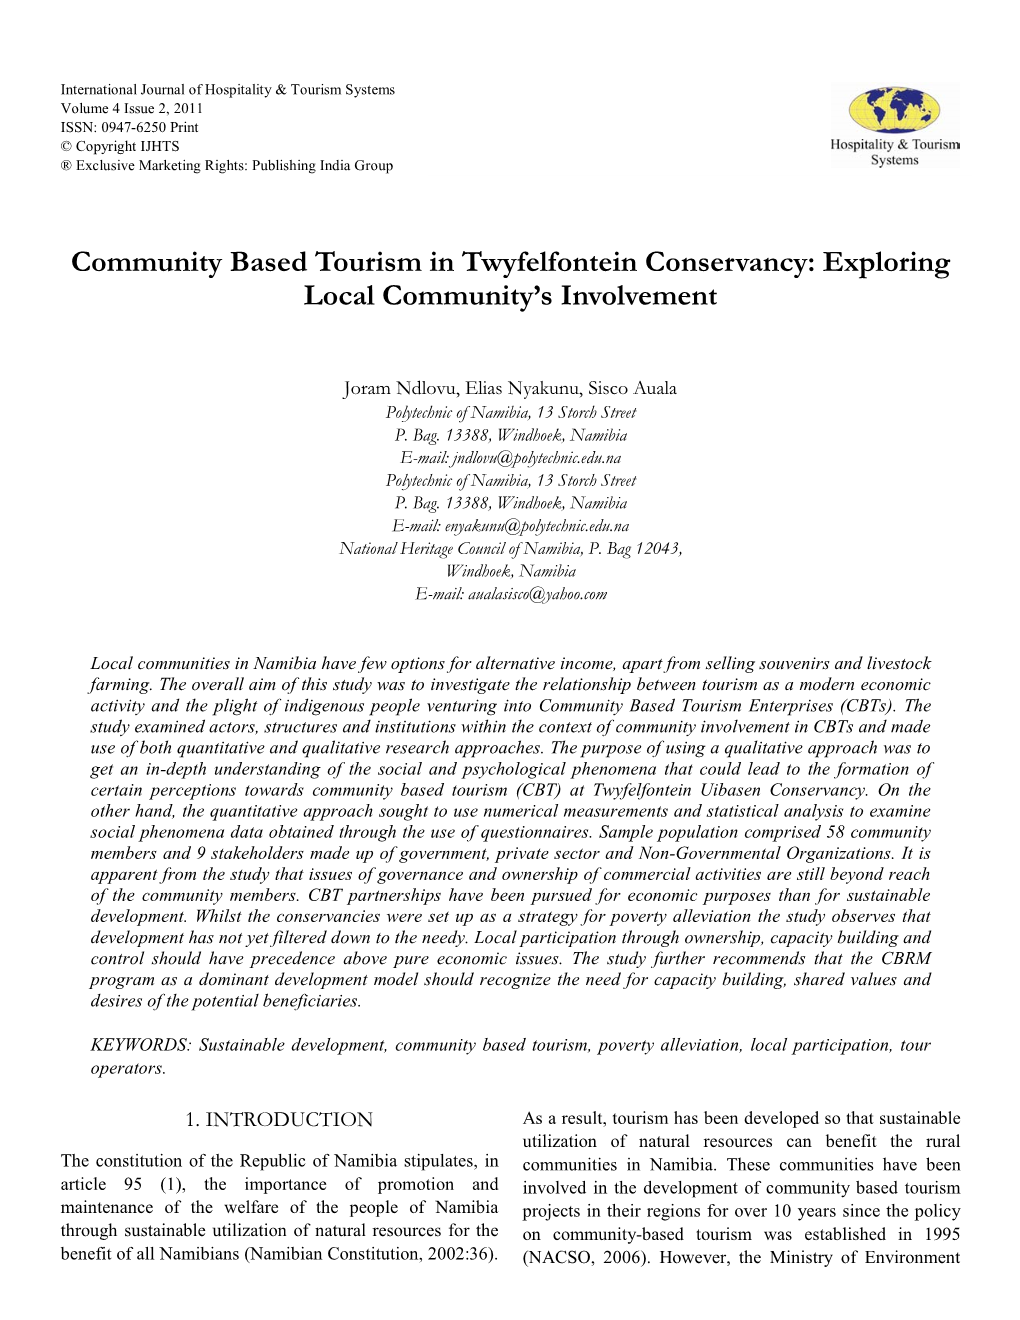 Community Based Tourism in Twyfelfontein Conservancy: Exploring Local Community’S Involvement